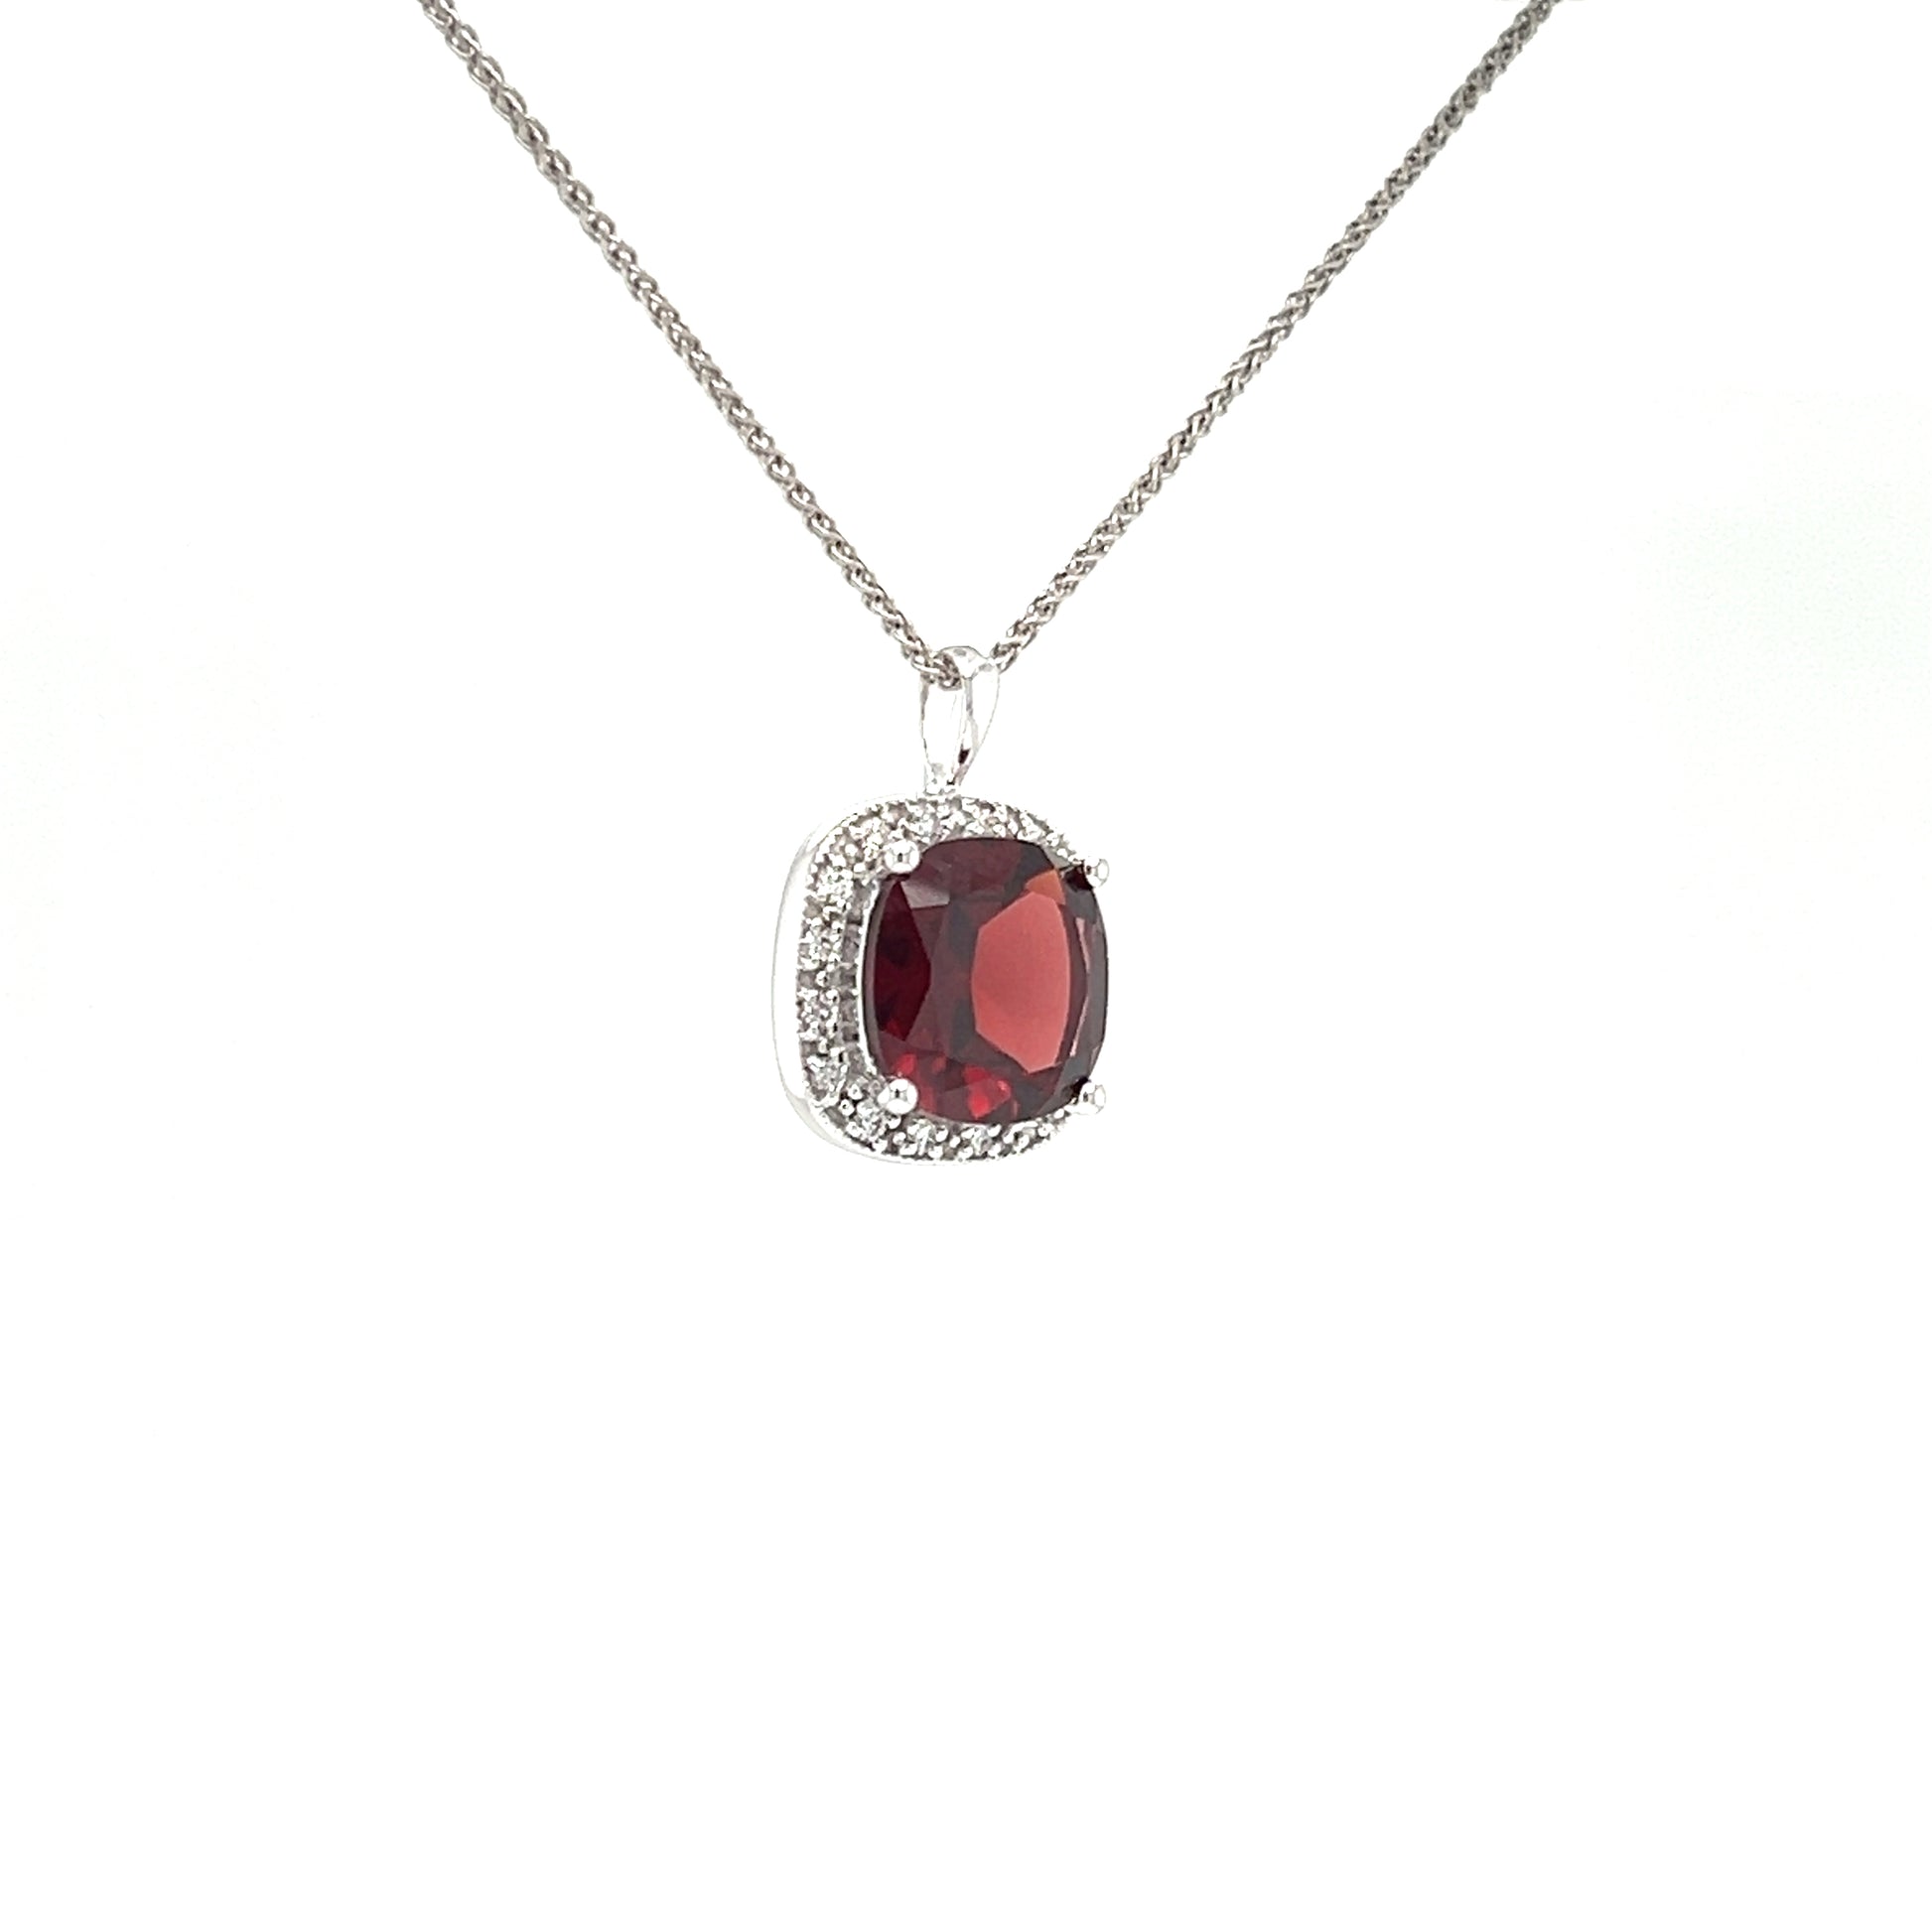 Cushion Garnet Pendant with  Diamond Halo in 14K White Gold Pendant and Chain Left Side View